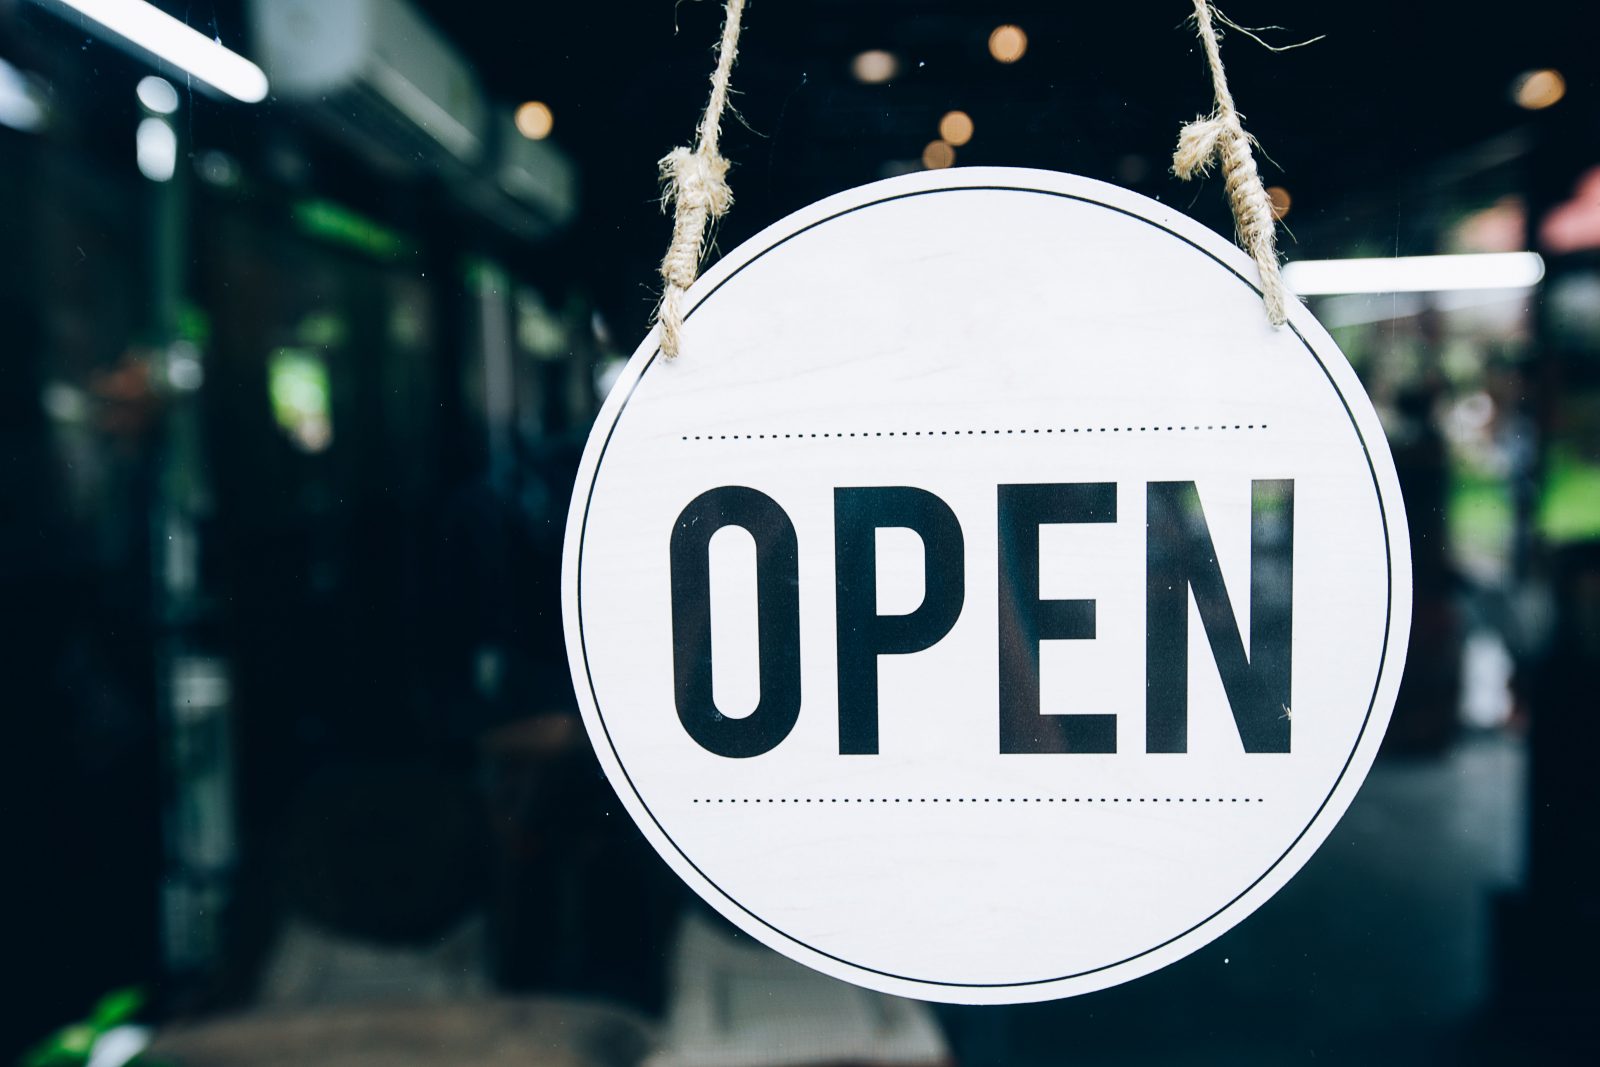 Close-up view of an open sign hanging in a glass door. The sign is round and white with the word "open" printed in black.